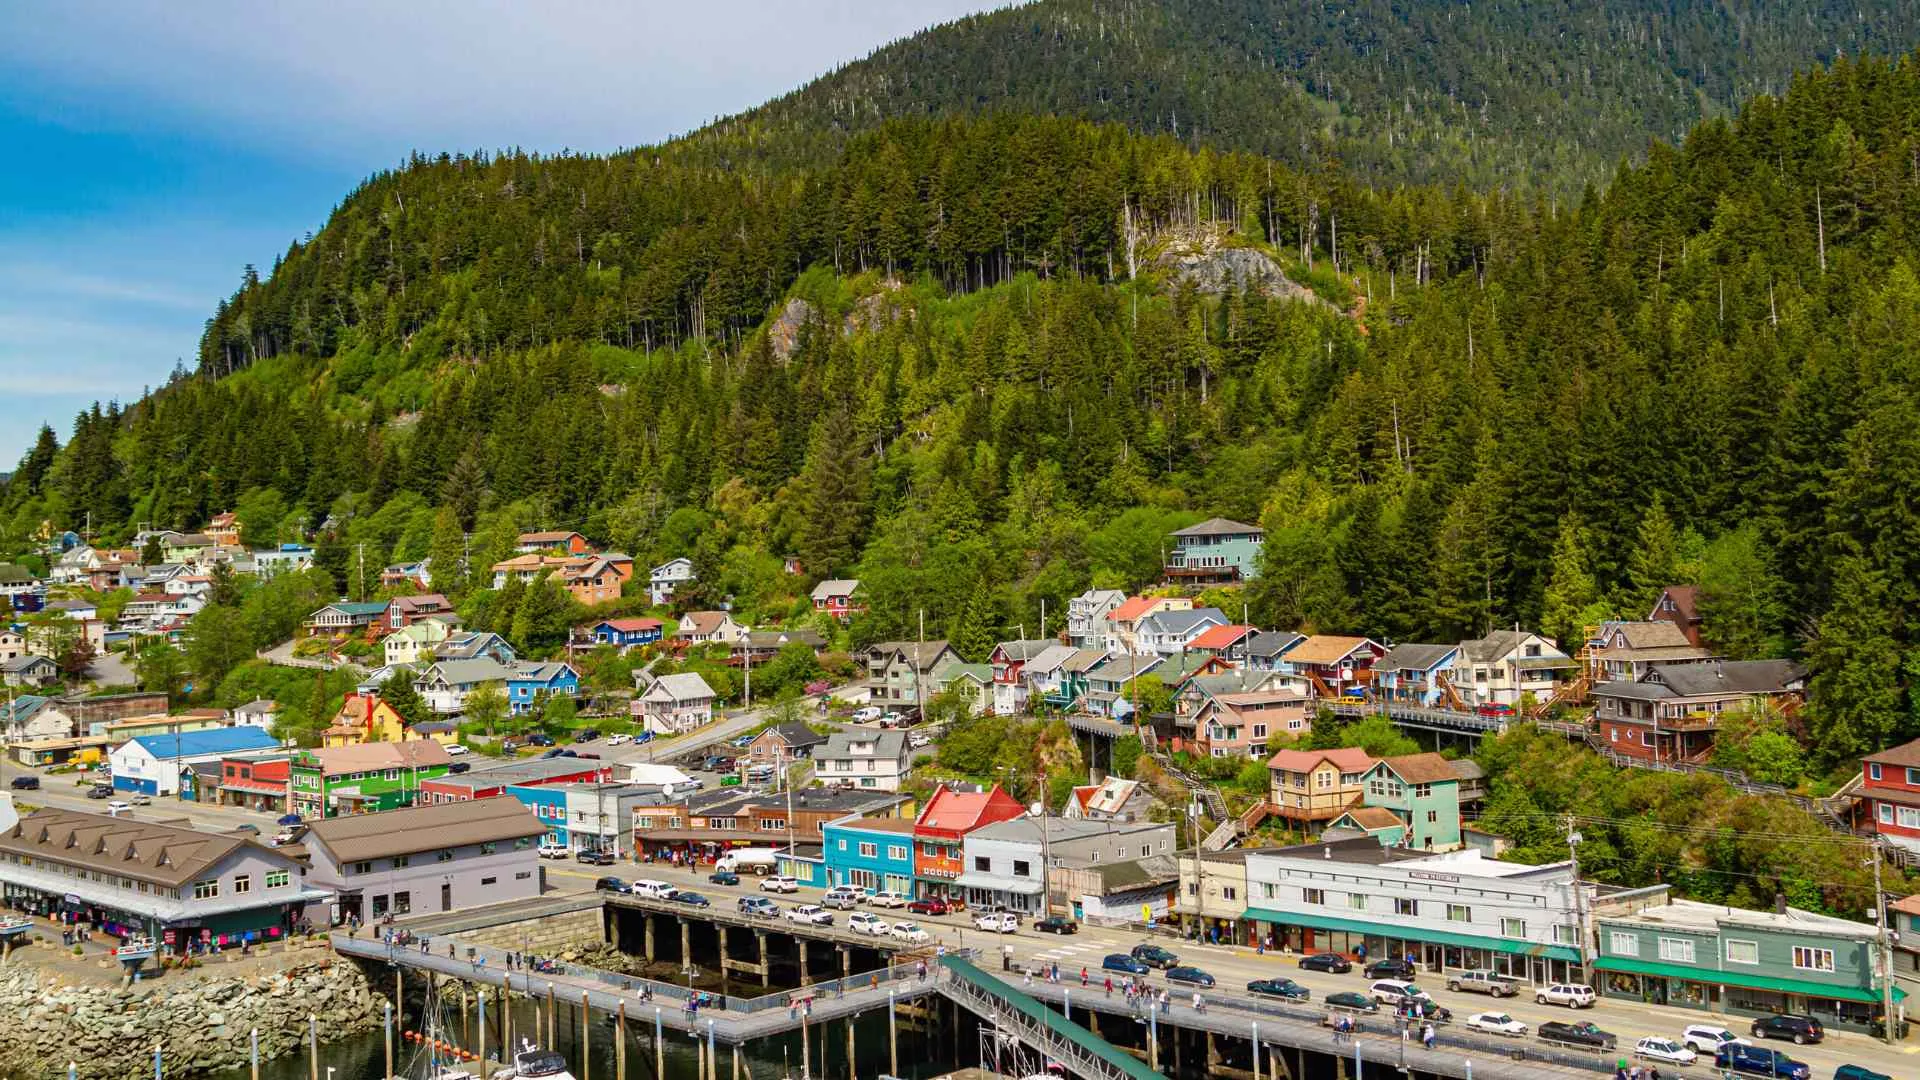 Ketchikan Alaska Weather, what to expect during your visit